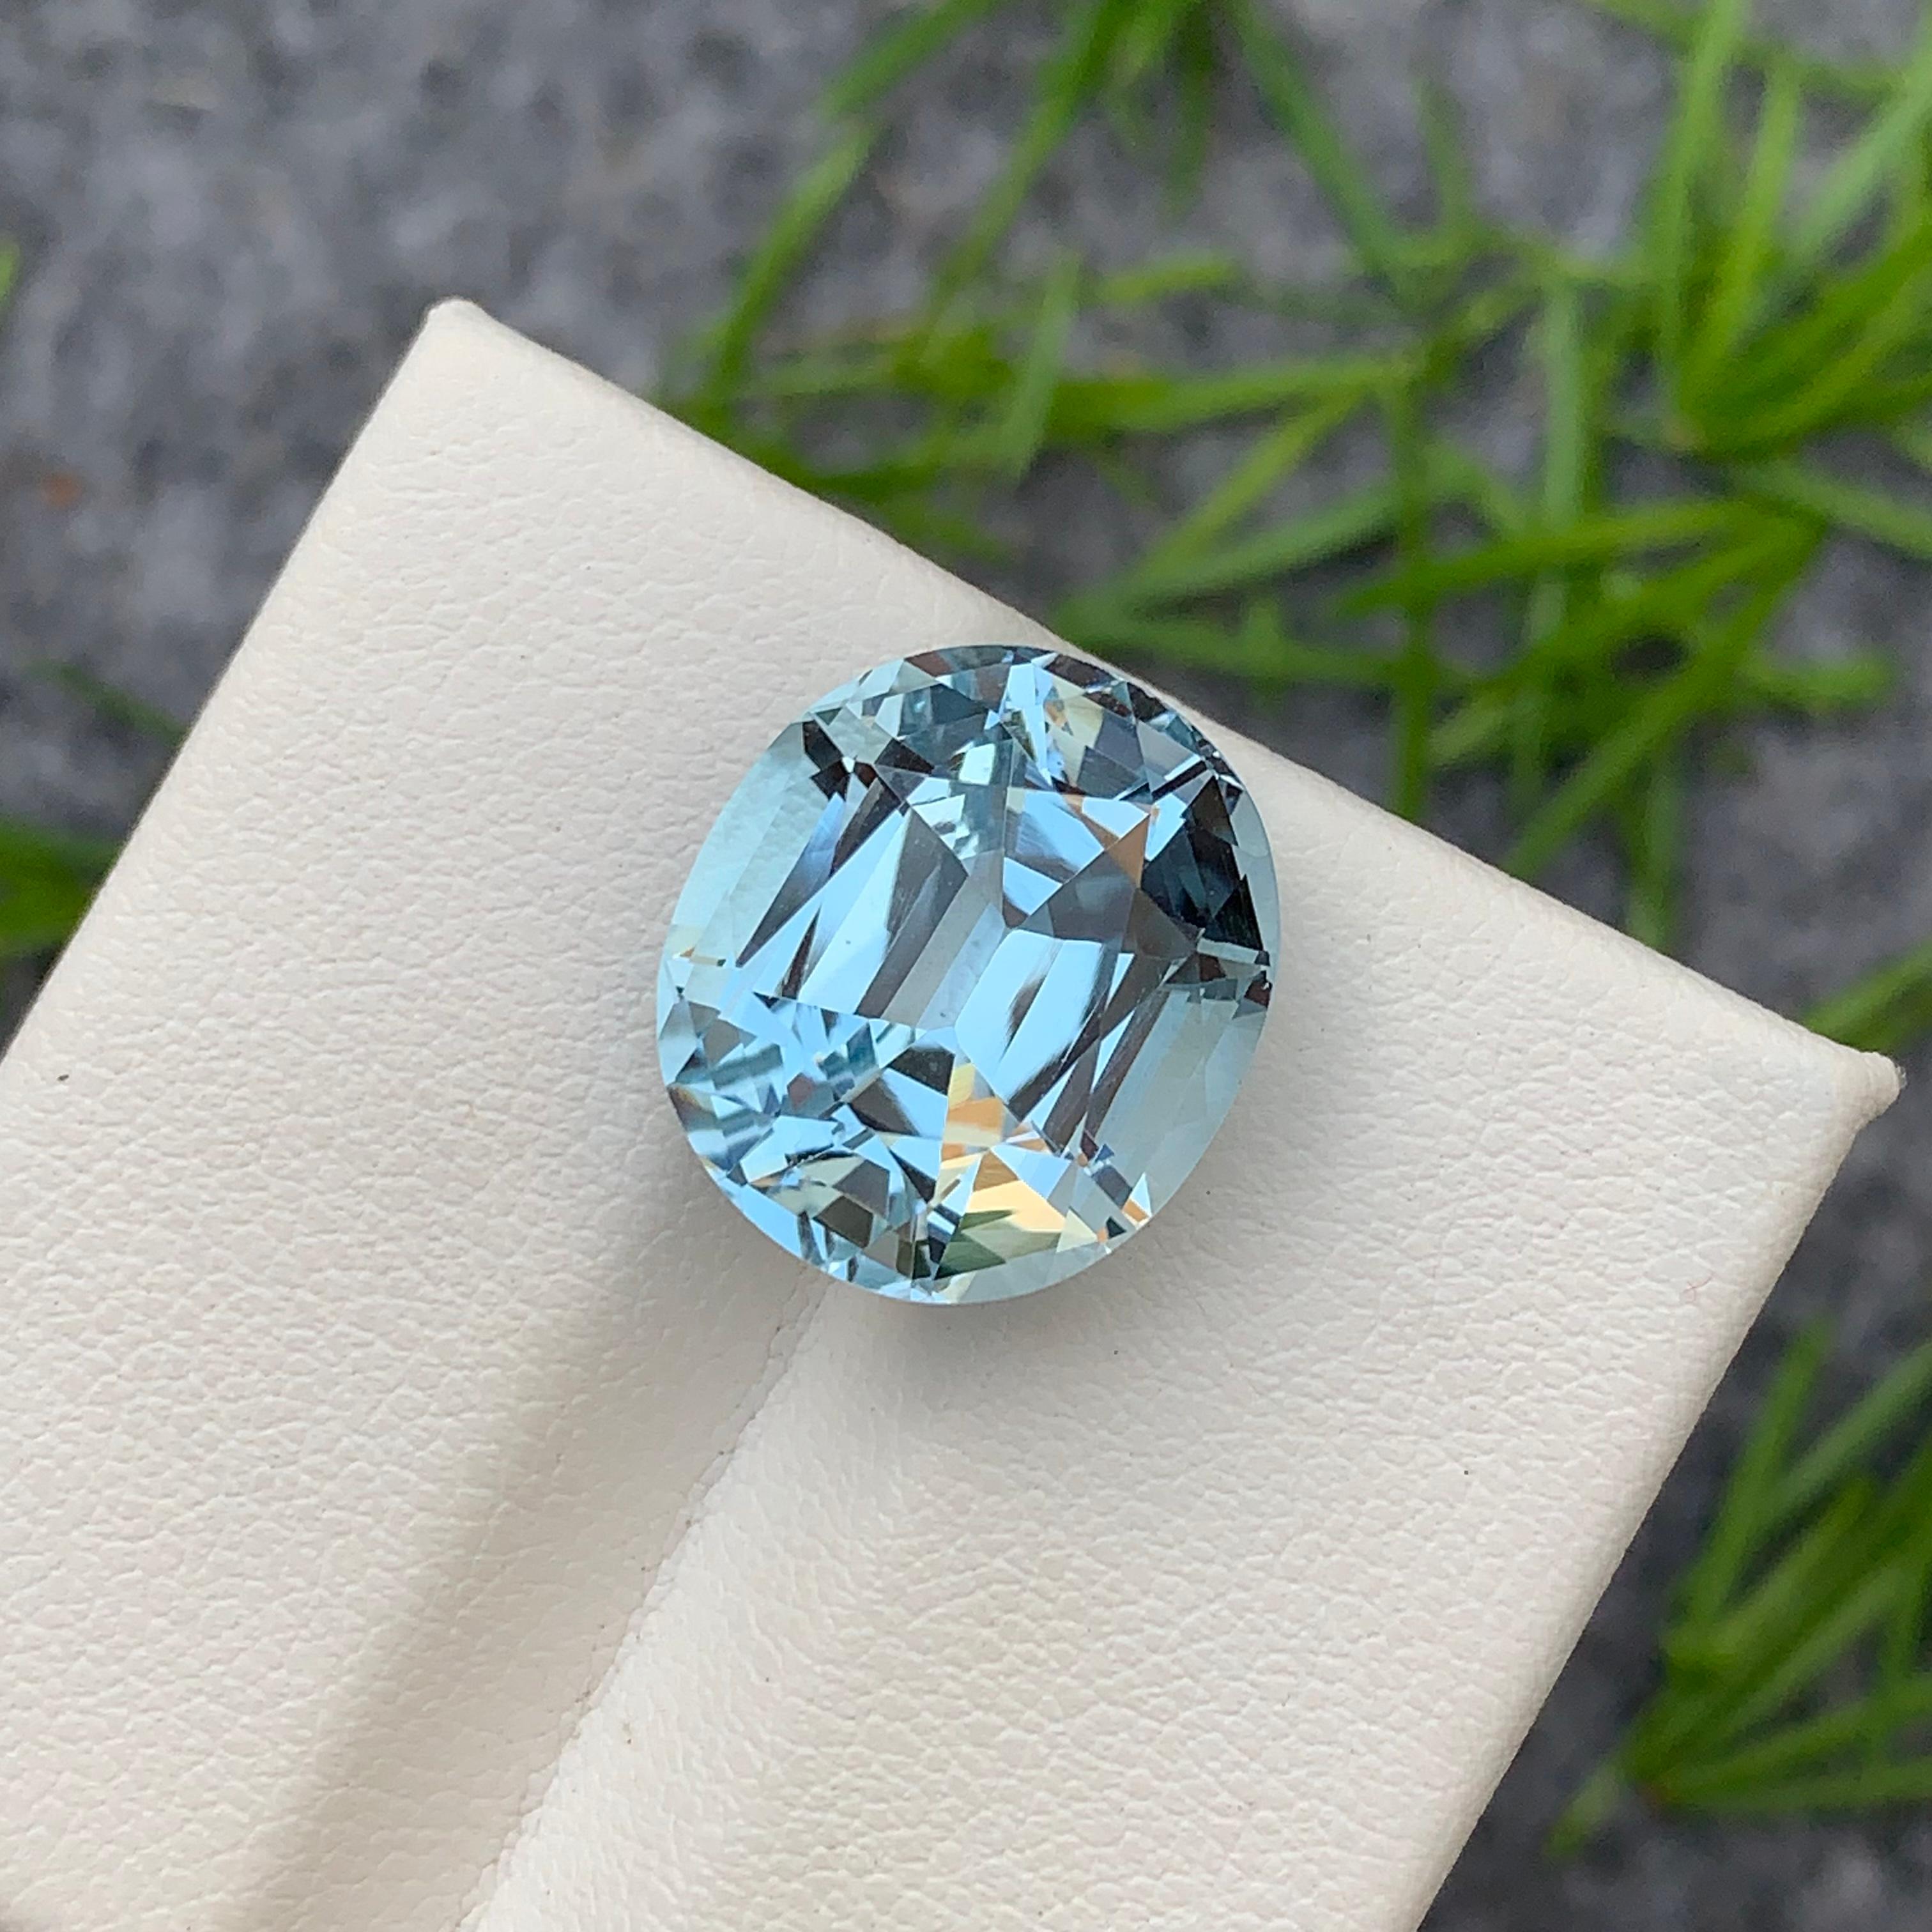 18.75 Carat Faceted Light Blue Topaz Cushion Cut Gemstone from Brazil Mine For Sale 6